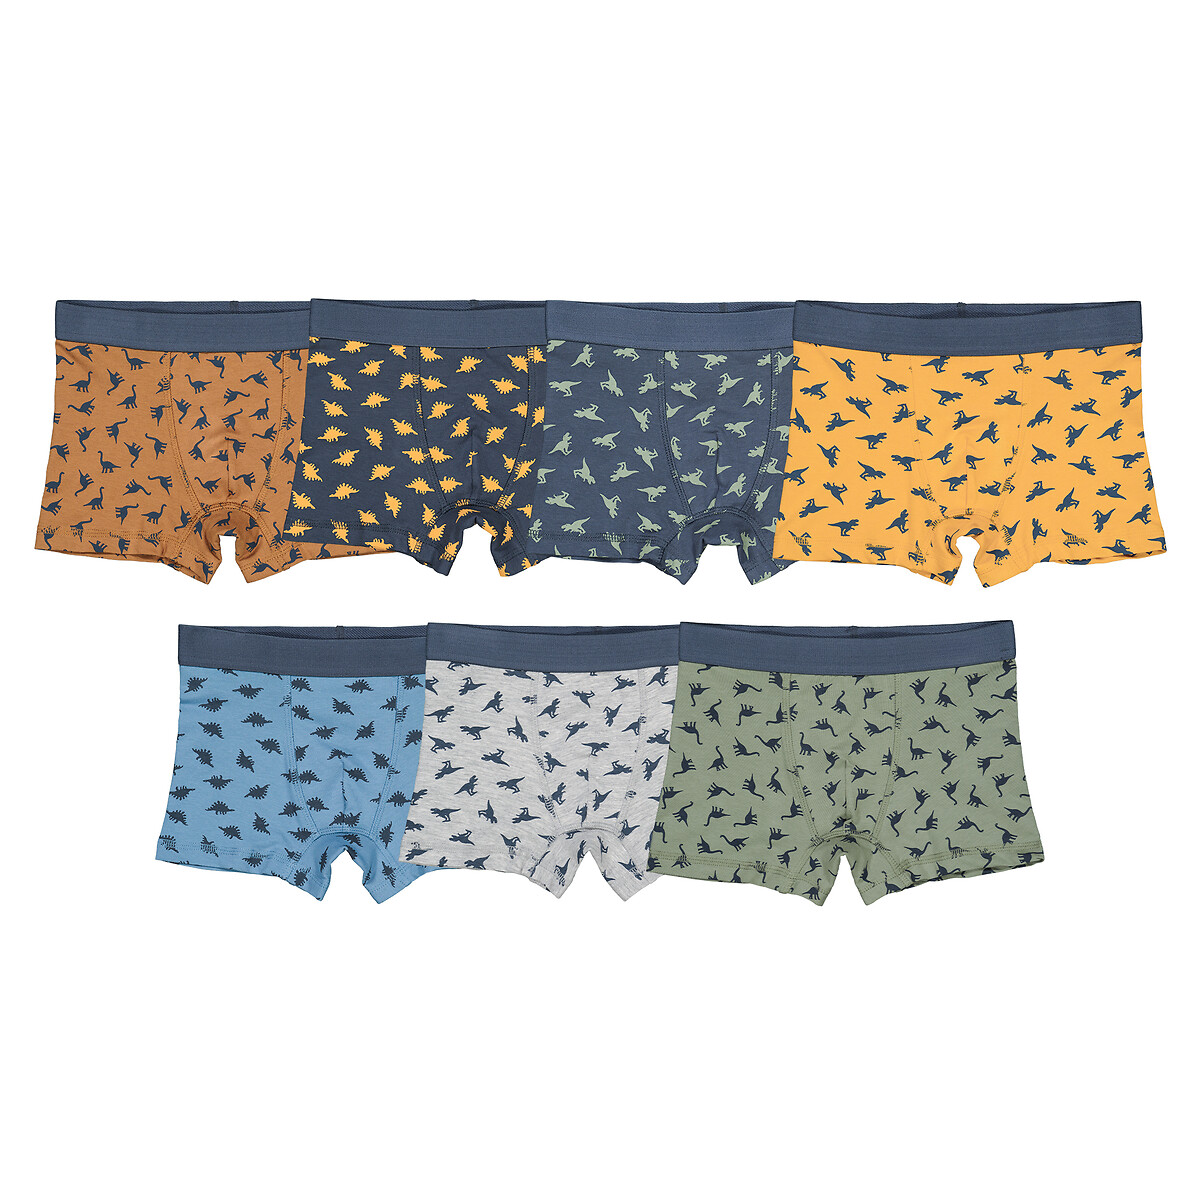 Pack of 7 Boxers in Dinosaur Print Cotton